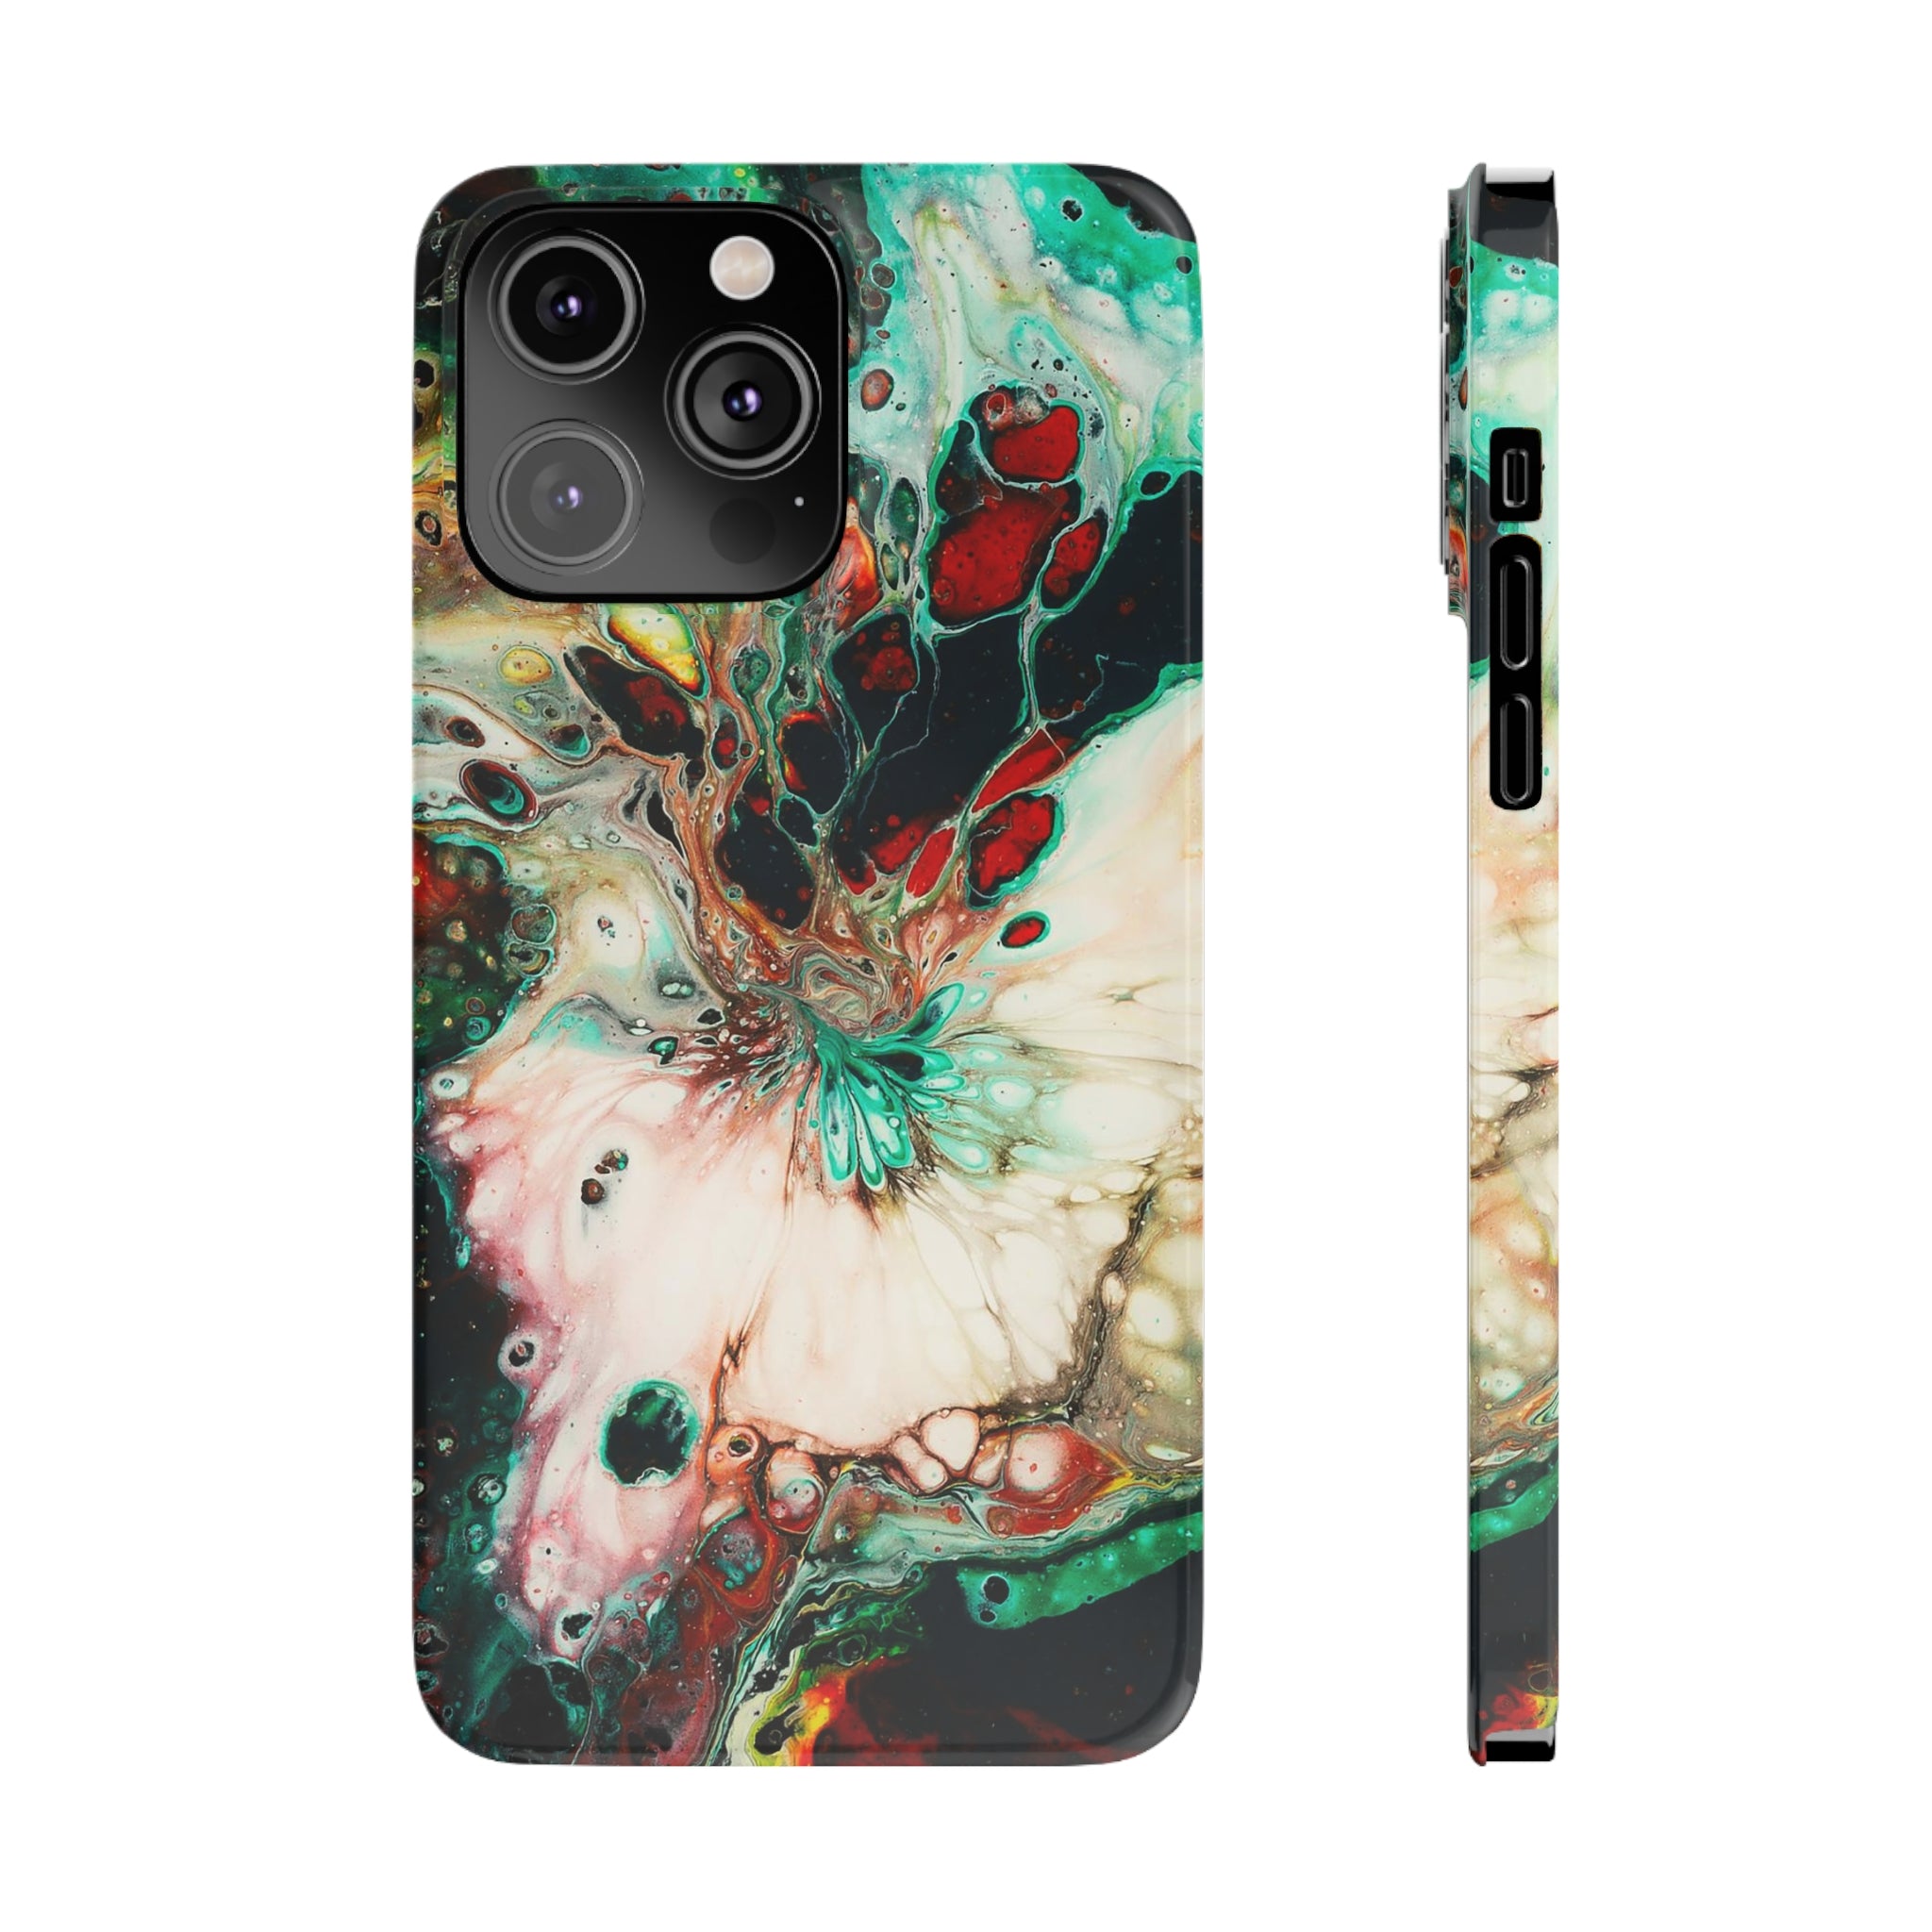 Flowers Of The Galaxy - Slim Phone Cases